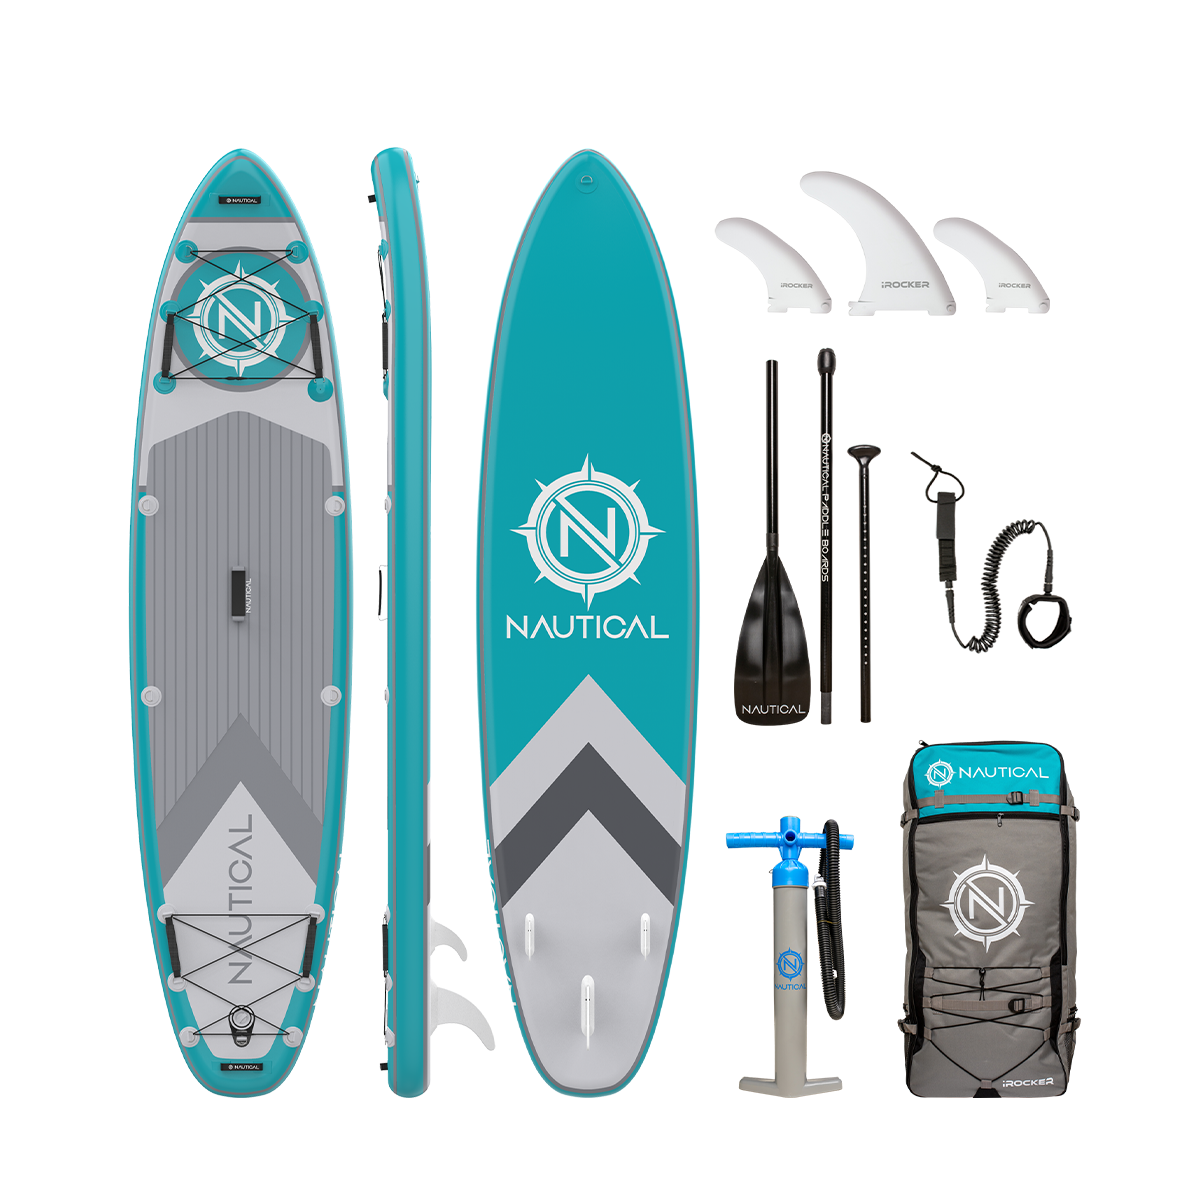  Inflatable Paddle Board